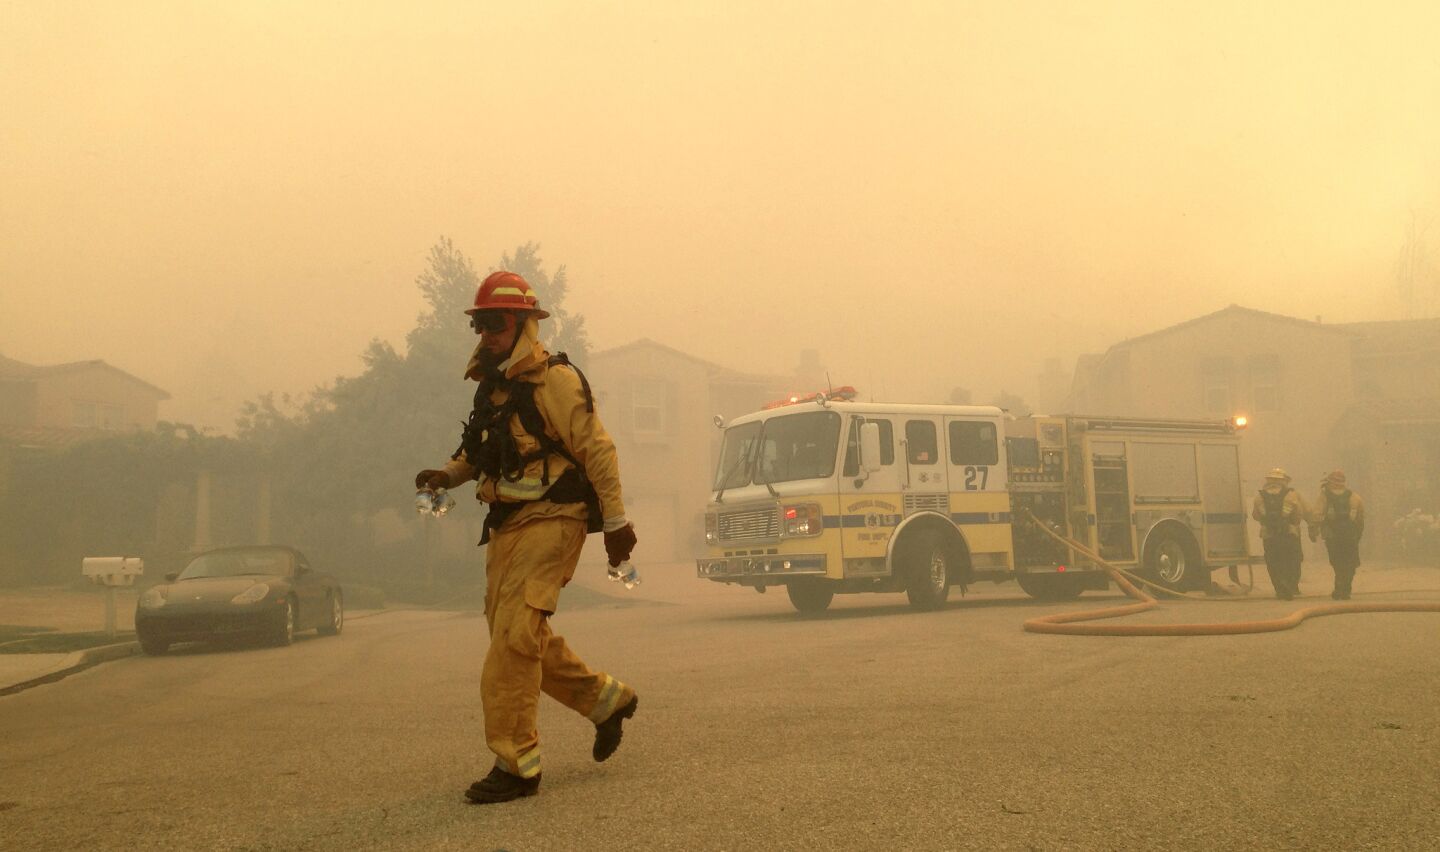 Firefighters move into position in the smoke-choked Dos Vientos neighborhood of Newbury Park as the Springs fire advances.